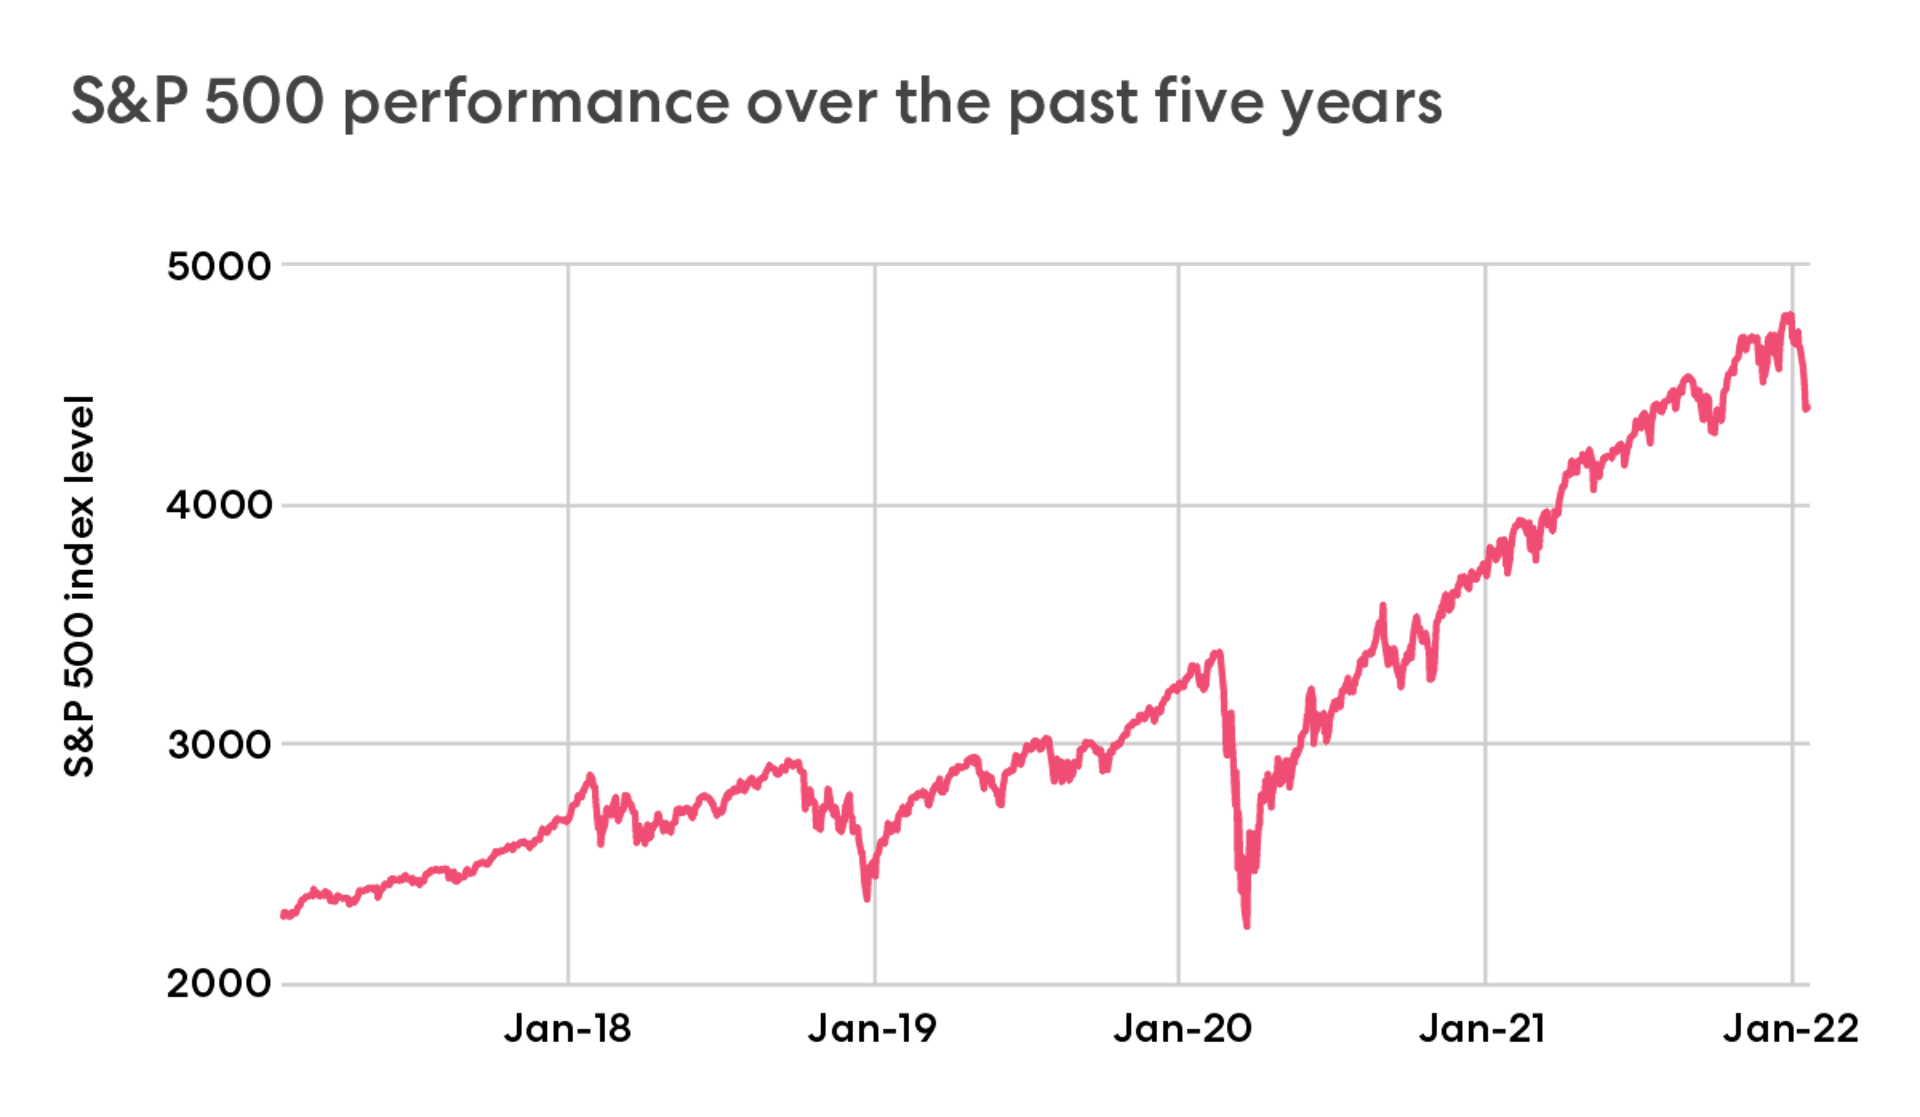 Chart showing that over the past 5 years, the S&P 500 index level has nearly doubled.